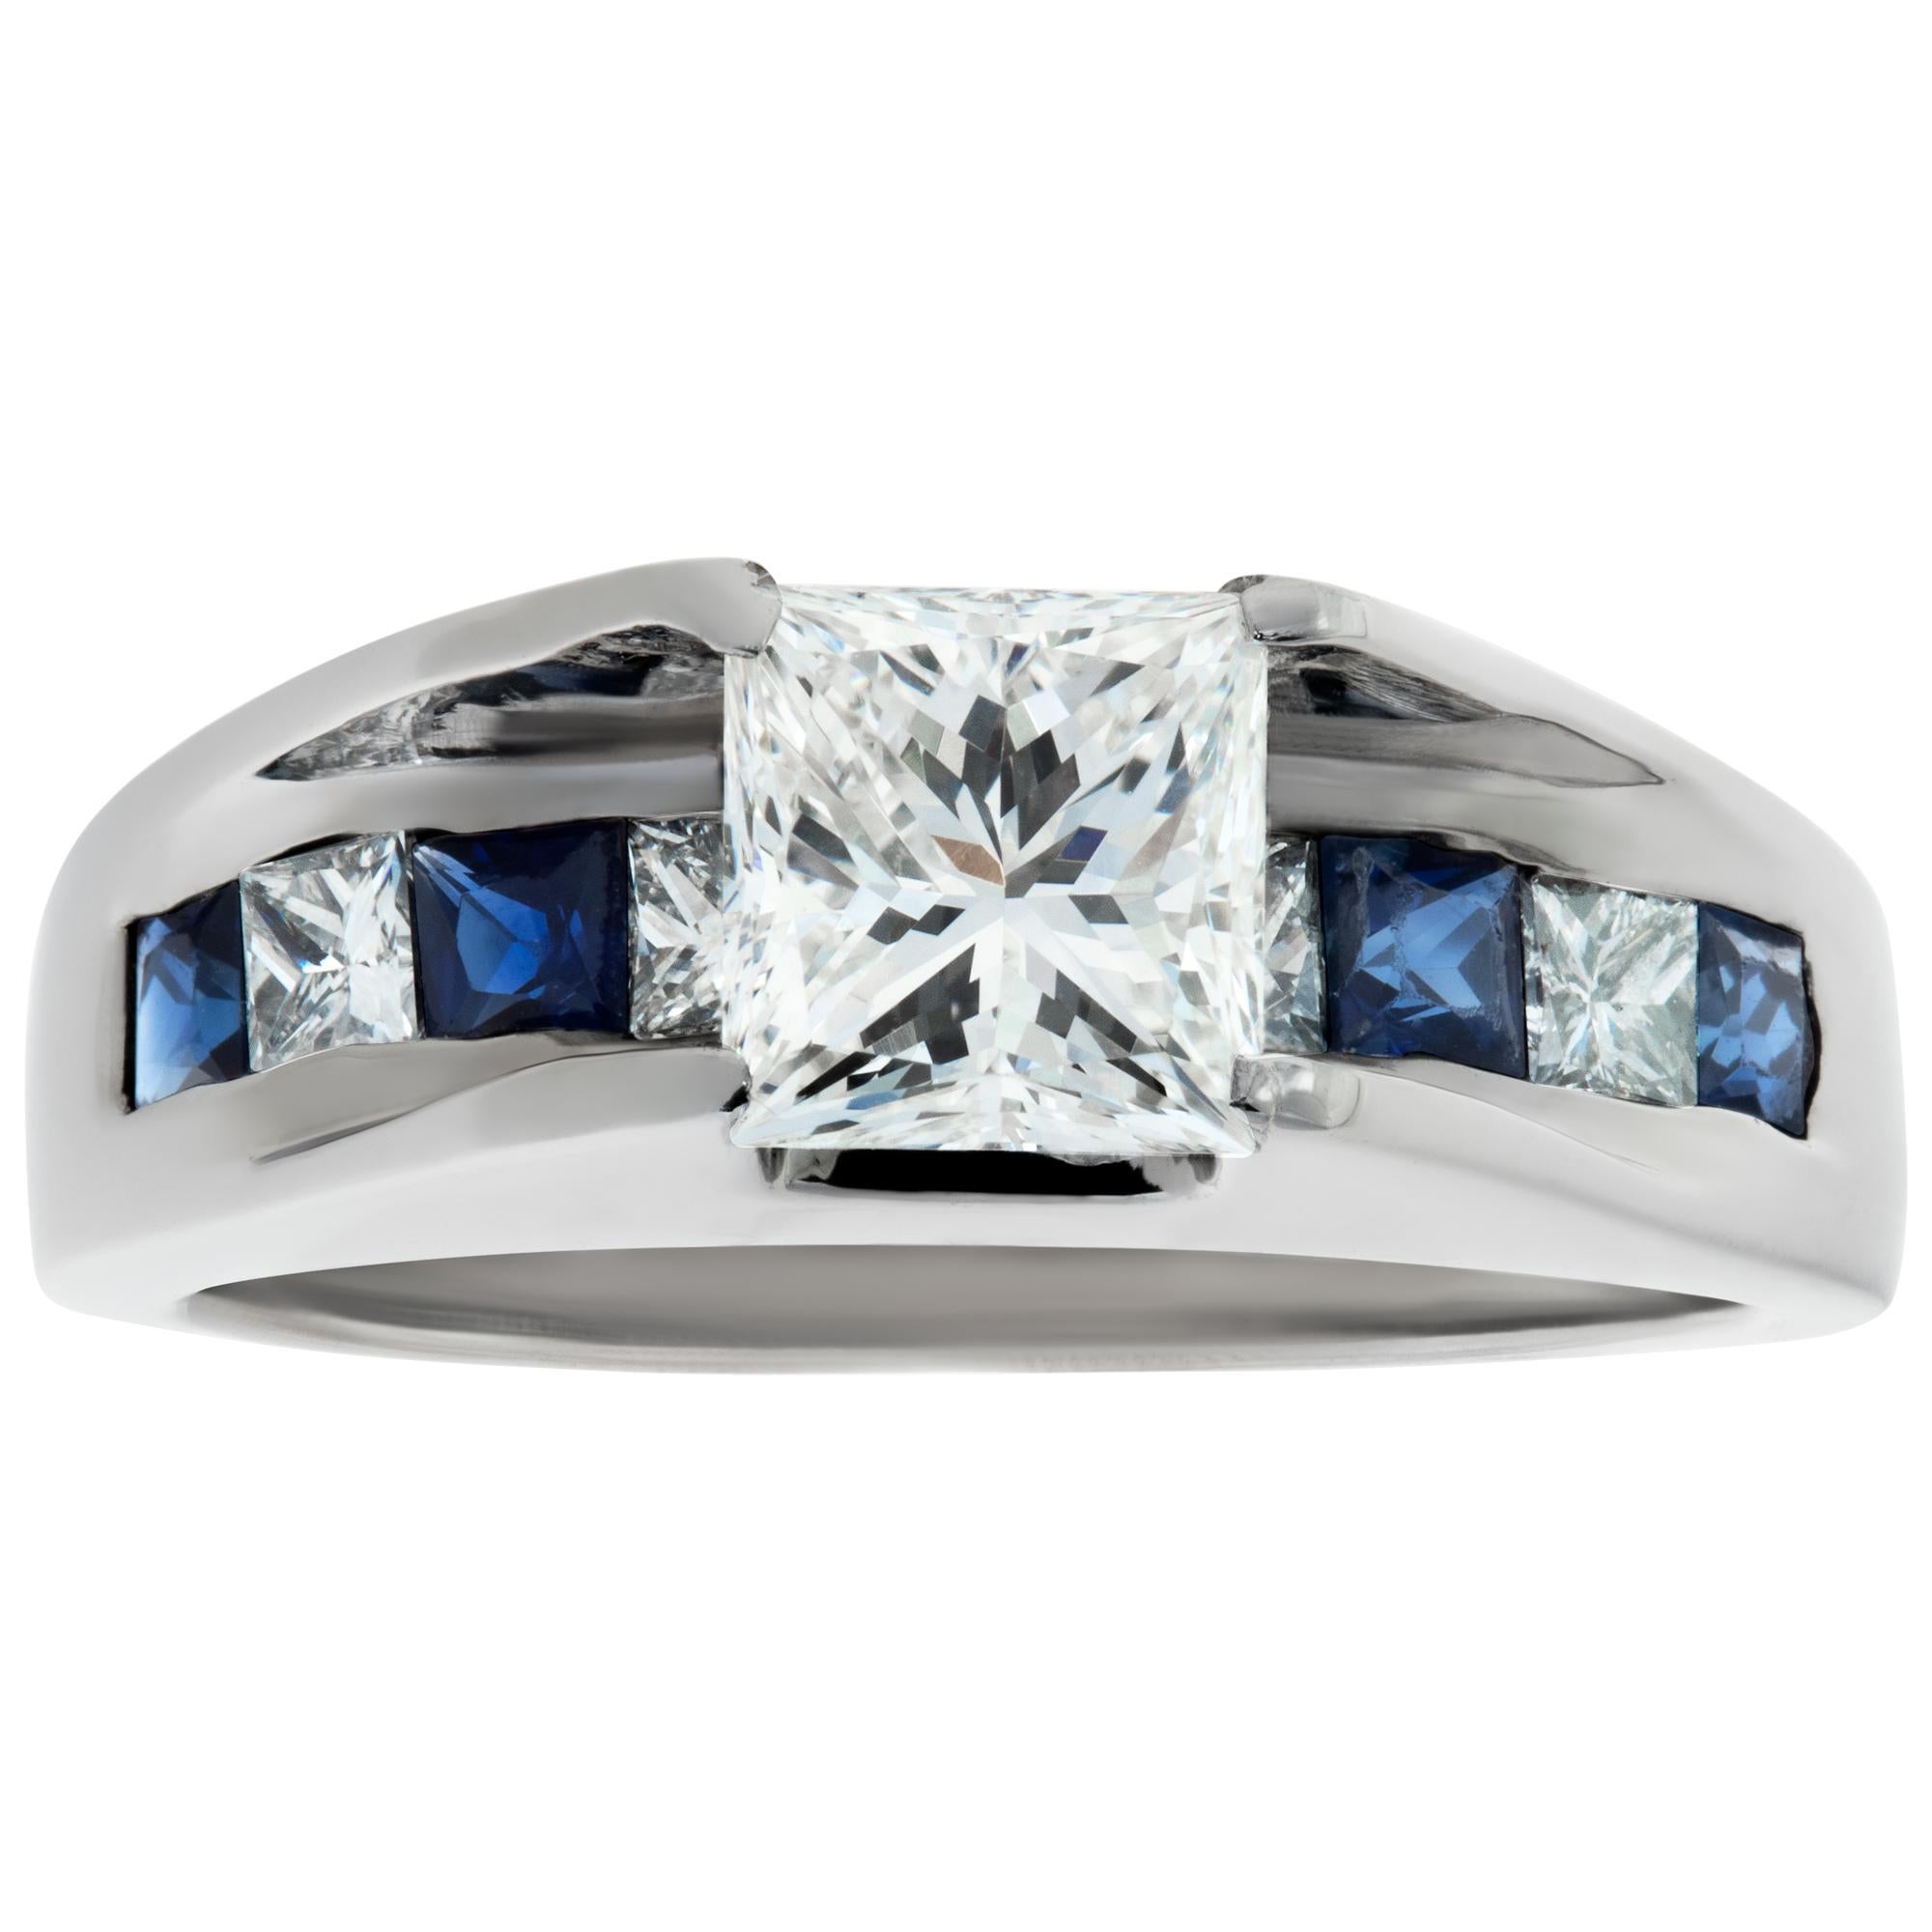 GIA certified princess cut diamond 1.01 carat (H Color, VS2 Clarity) set in platinum with side diamonds and sapphire accents. Size 5.This GIA certified ring is currently size 5 and some items can be sized up or down, please ask! It weighs 5.8